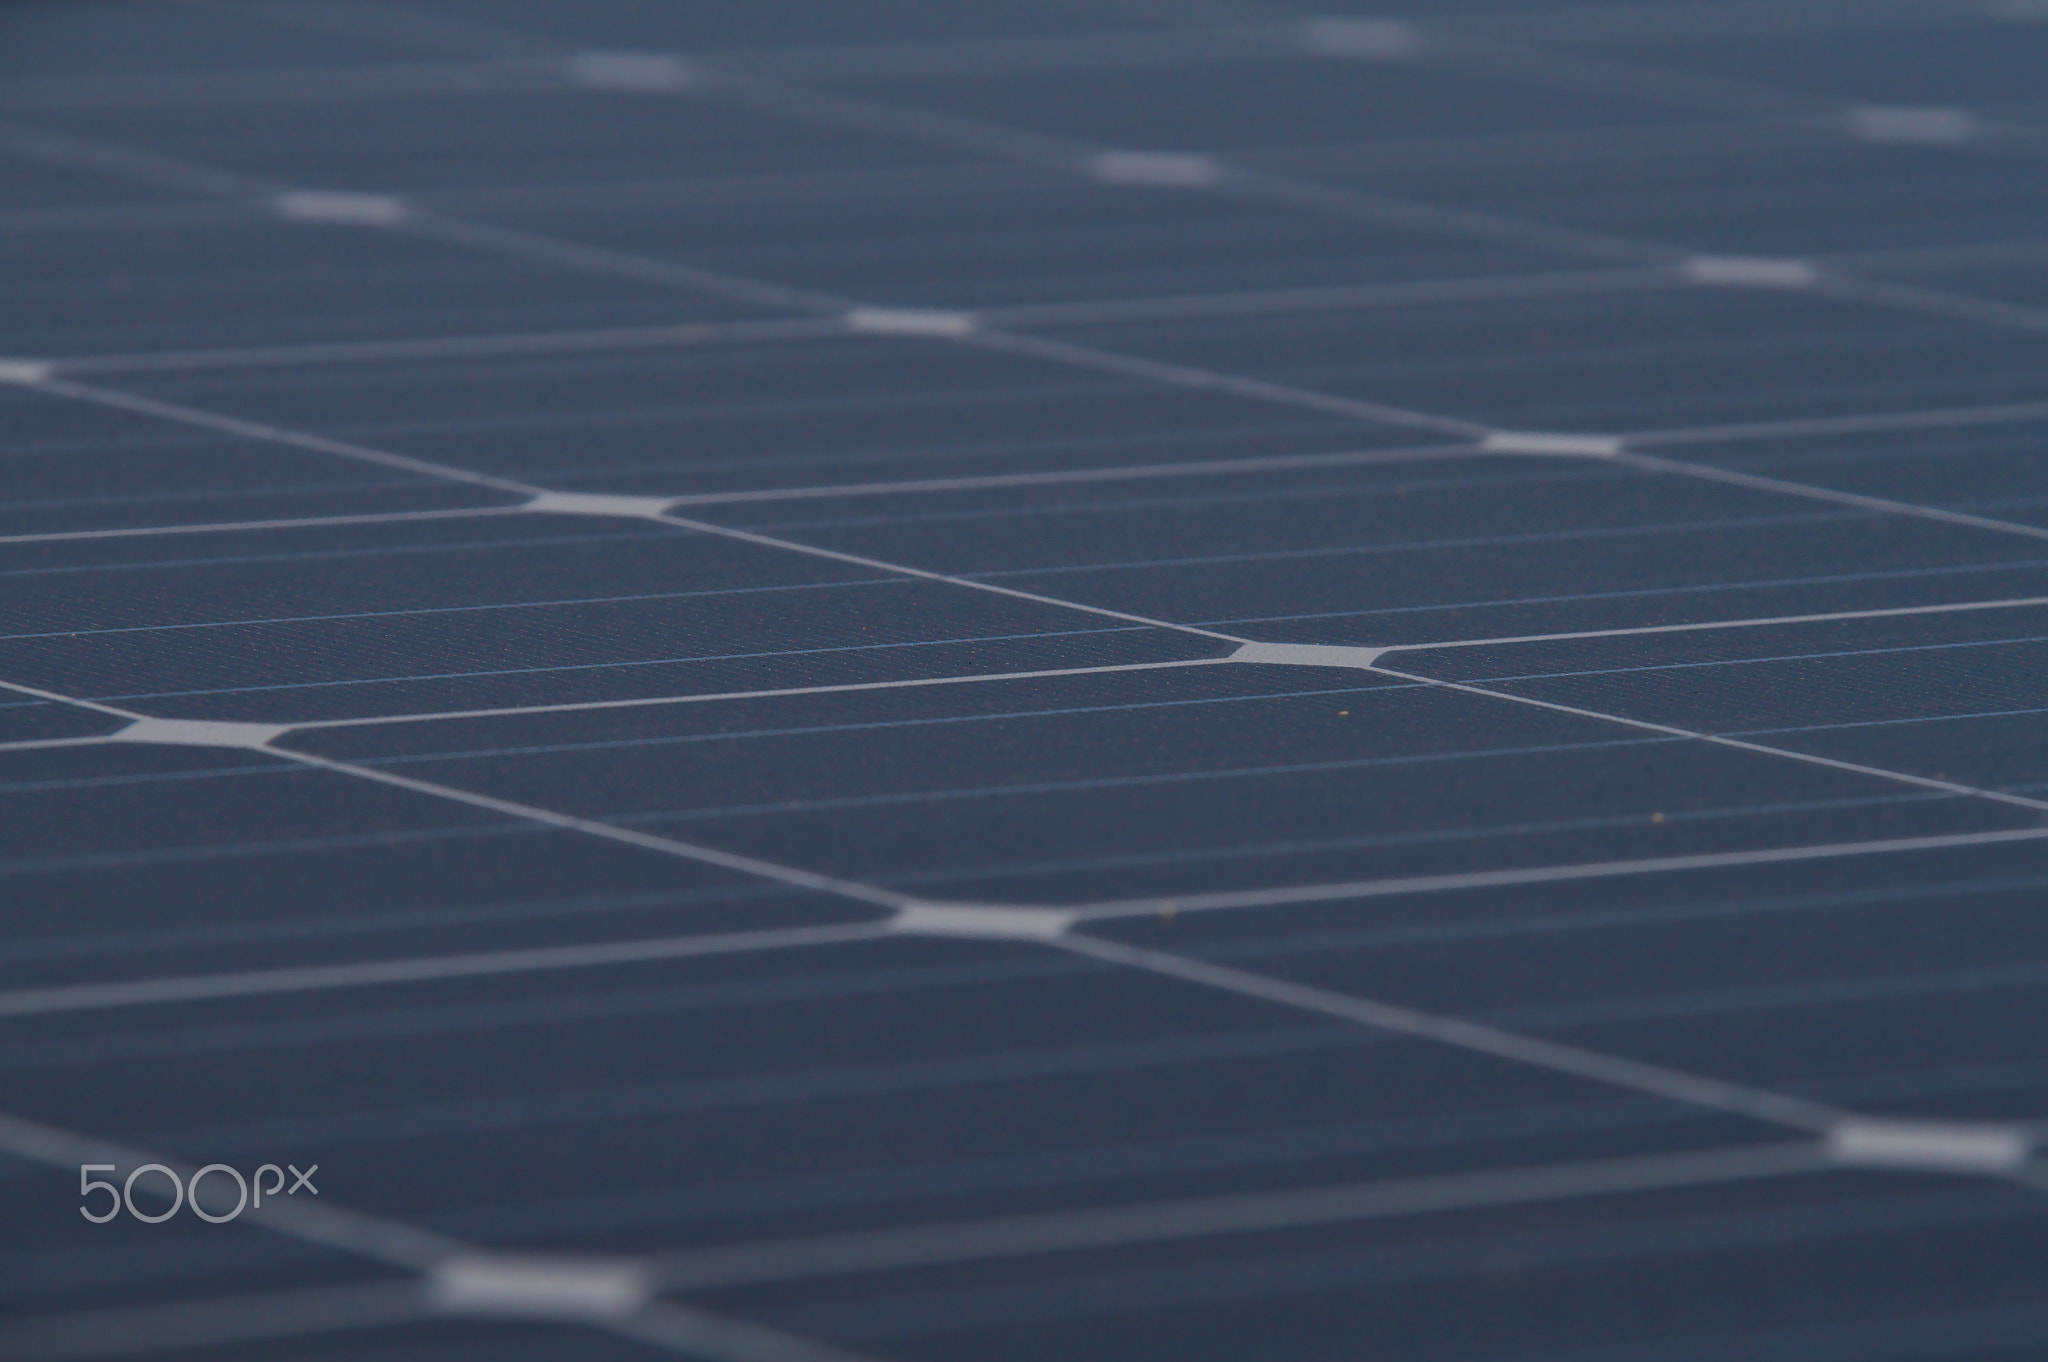 Surface of a solar panel